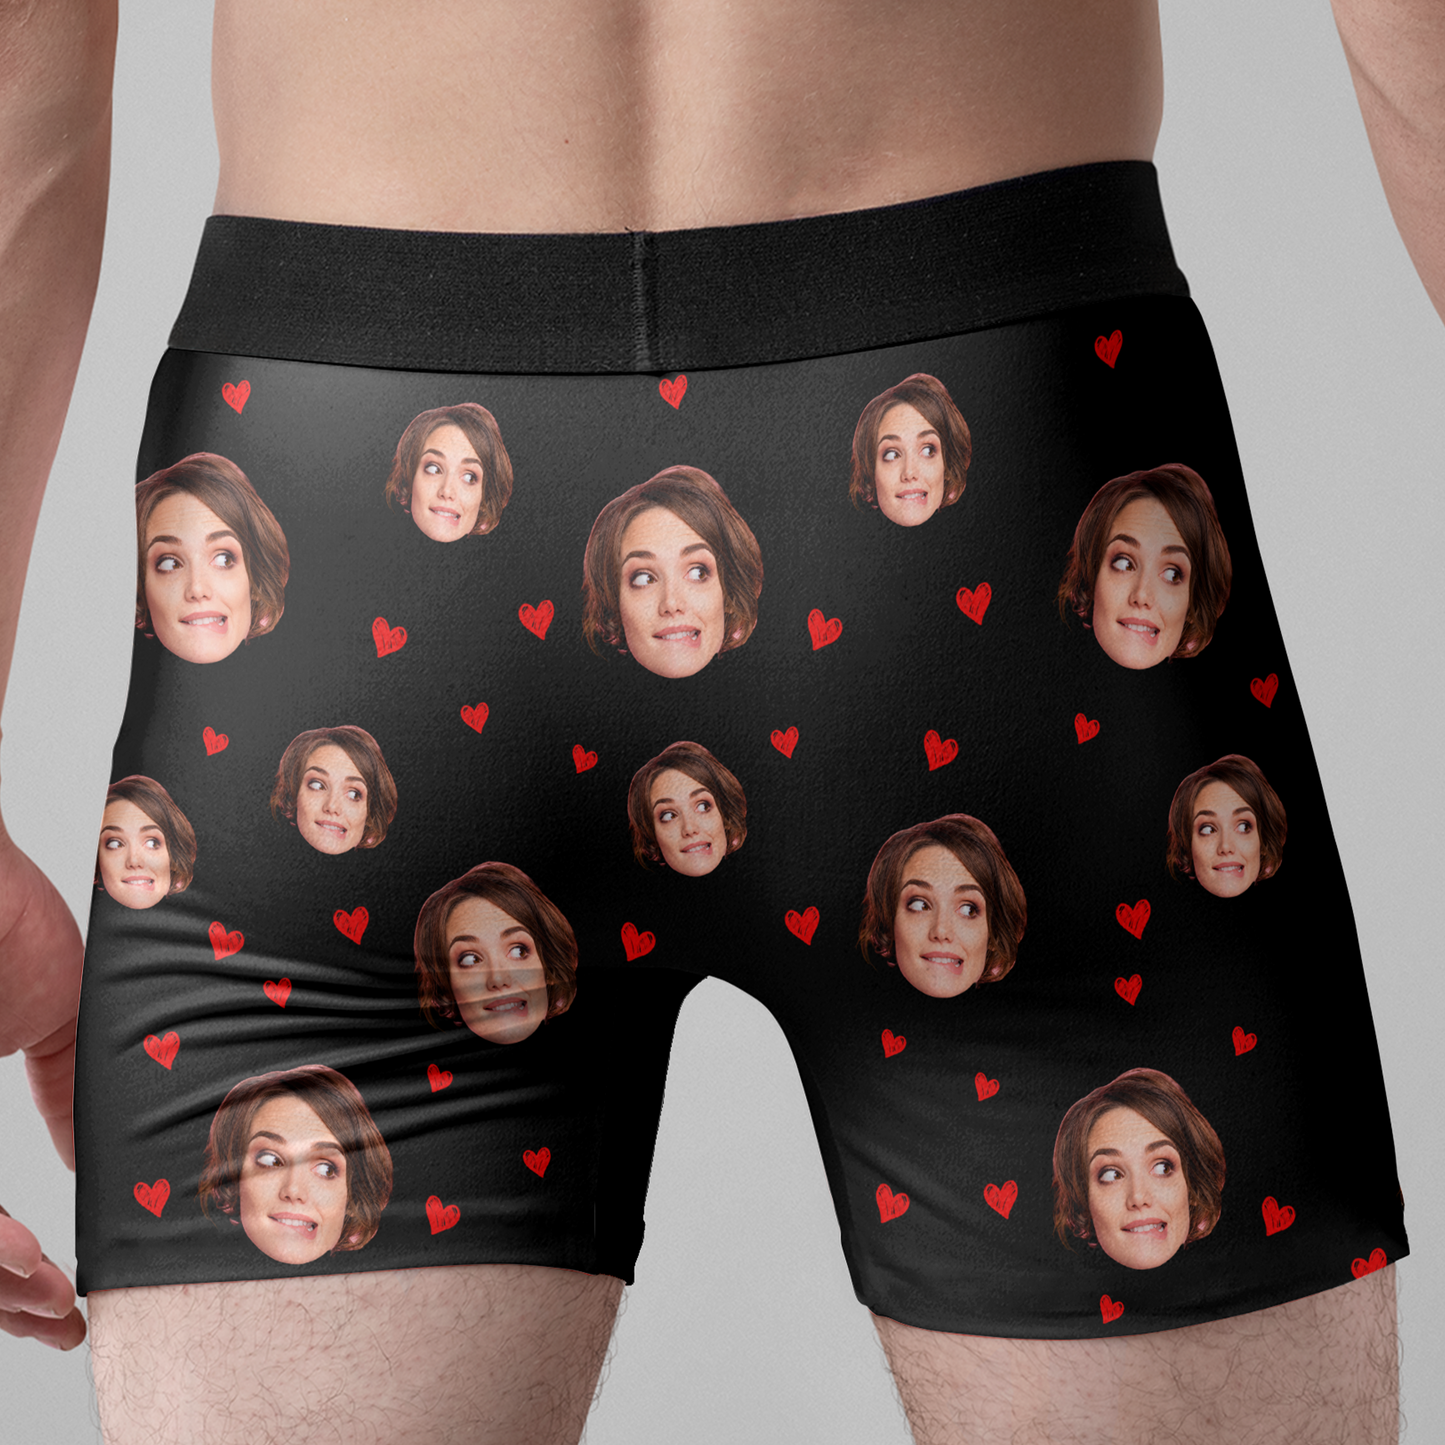 I Love Every Bone In Your Body - Personalized Photo Men's Boxer Briefs